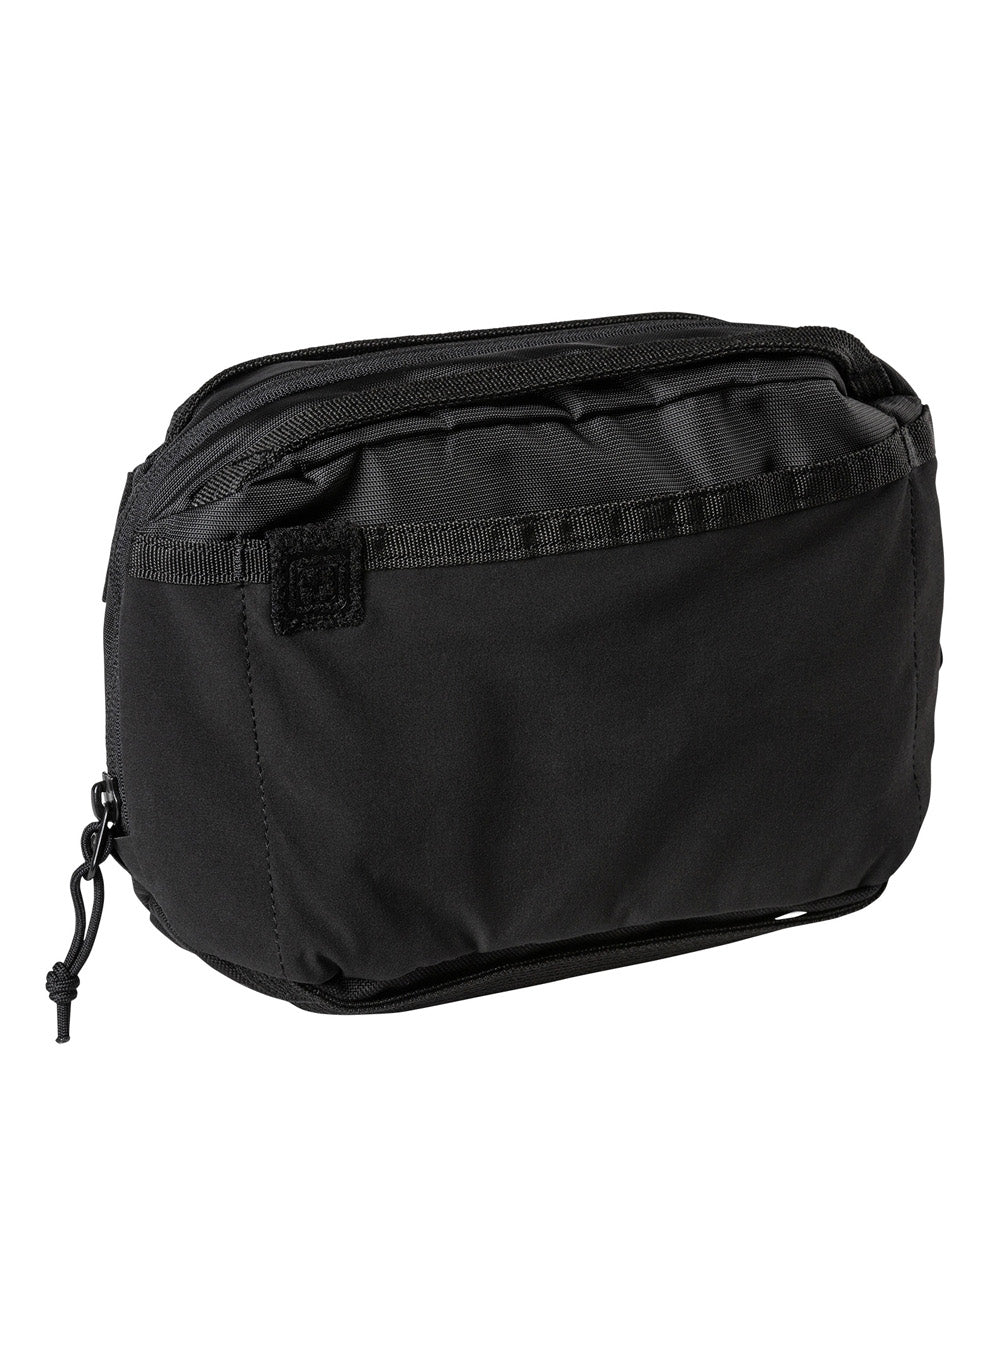 5.11 Tactical Emergency Ready Pouch